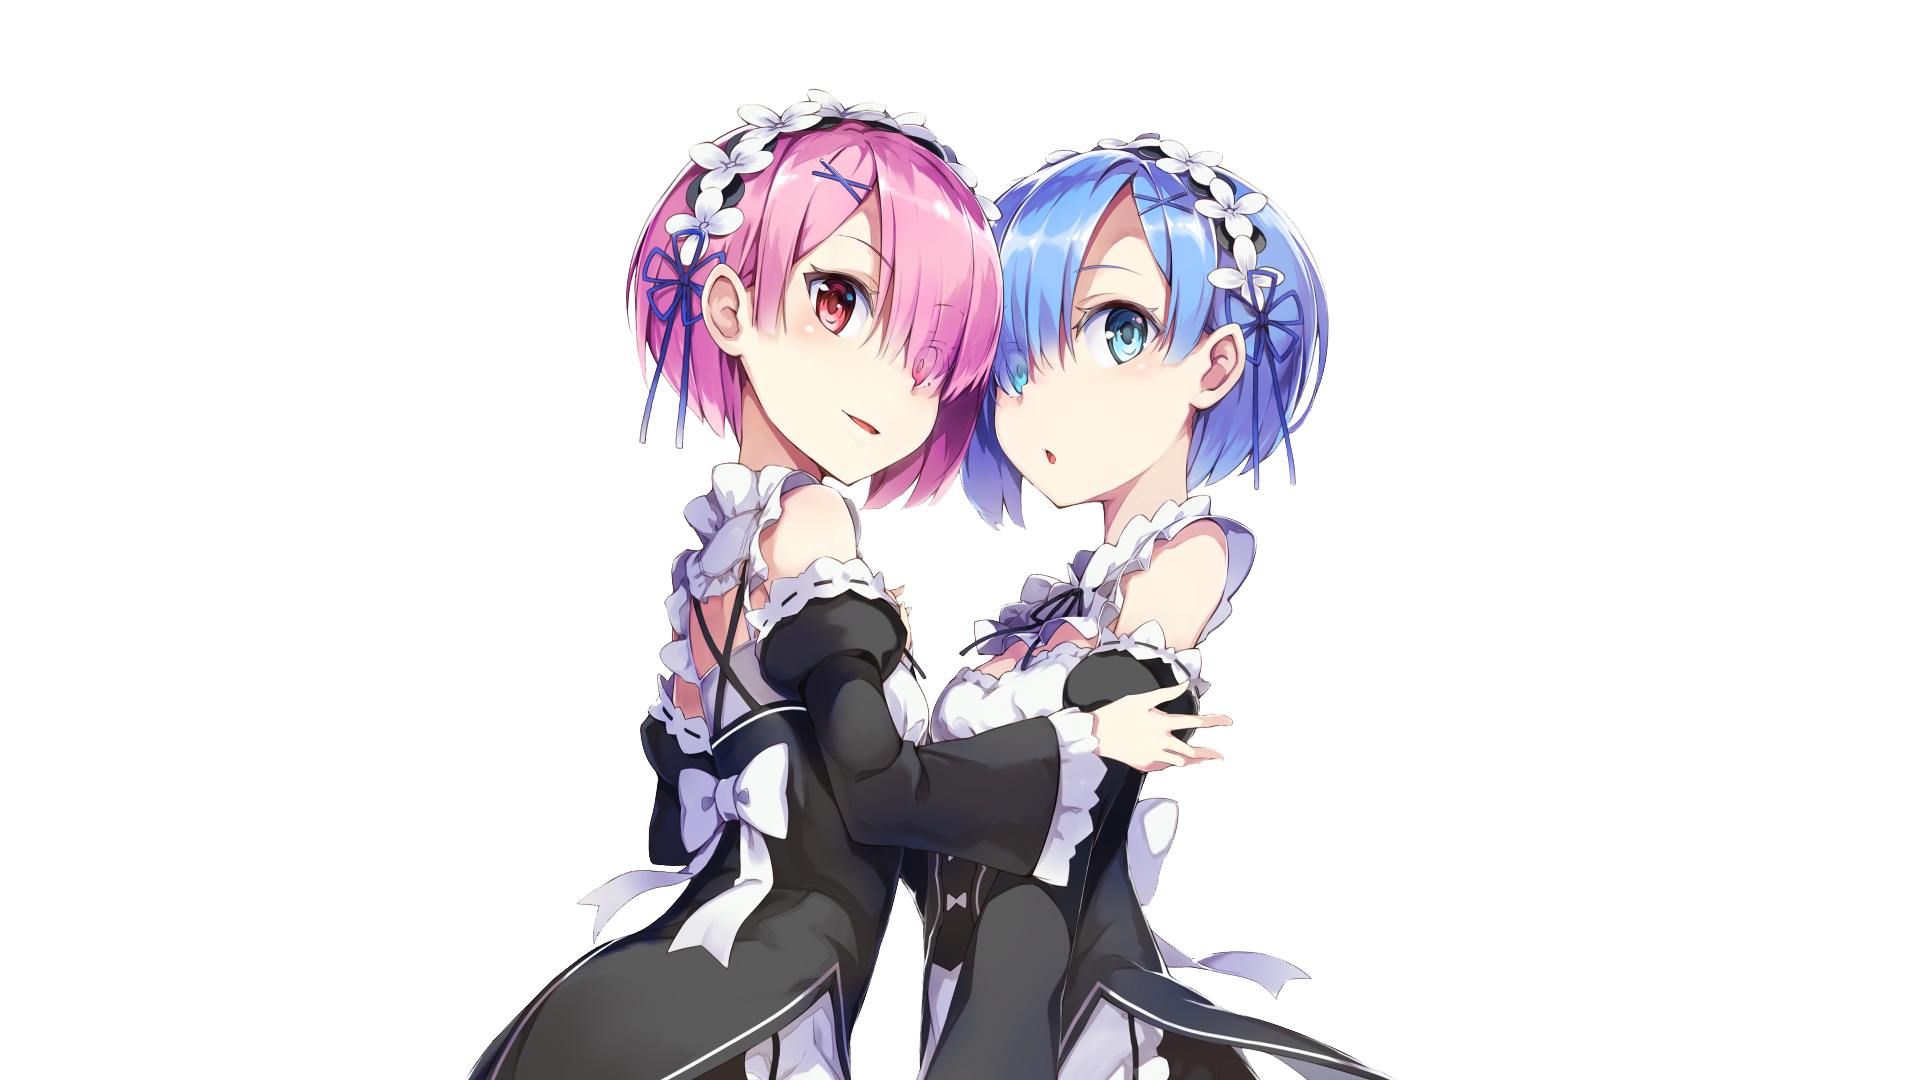 Rem, Ram, and Rom by greatpein on DeviantArt